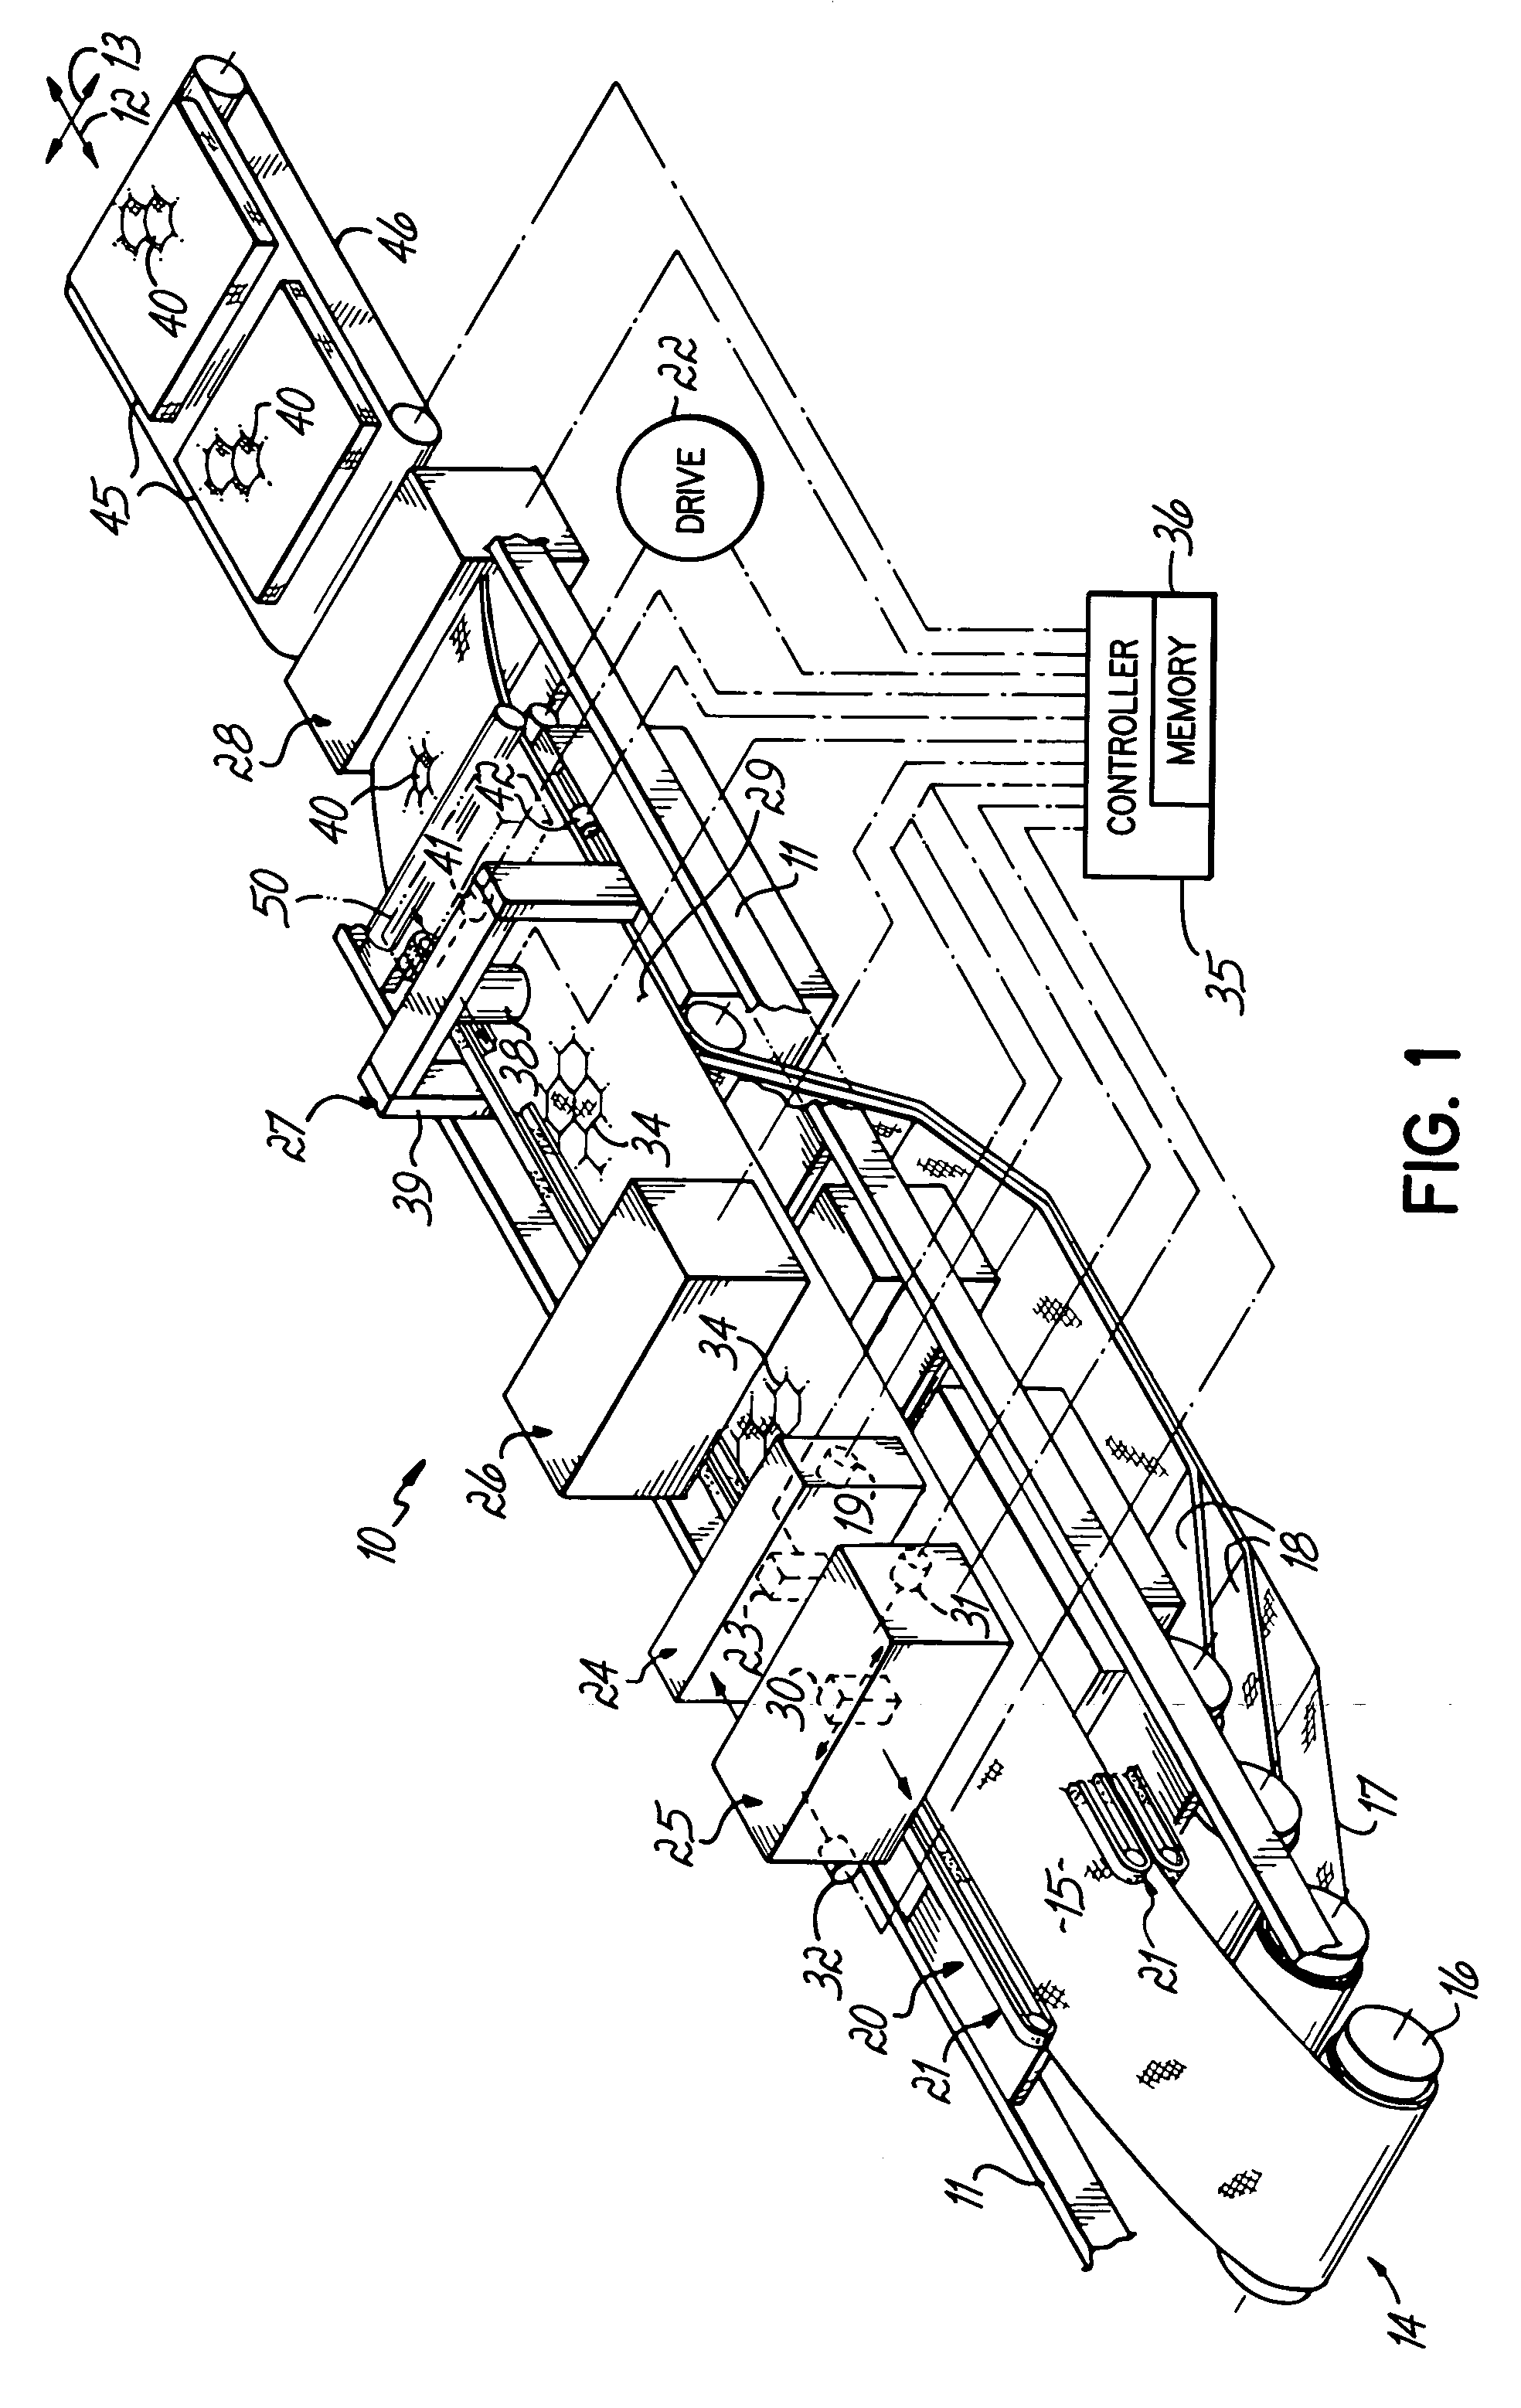 Method and apparatus for ink jet printing